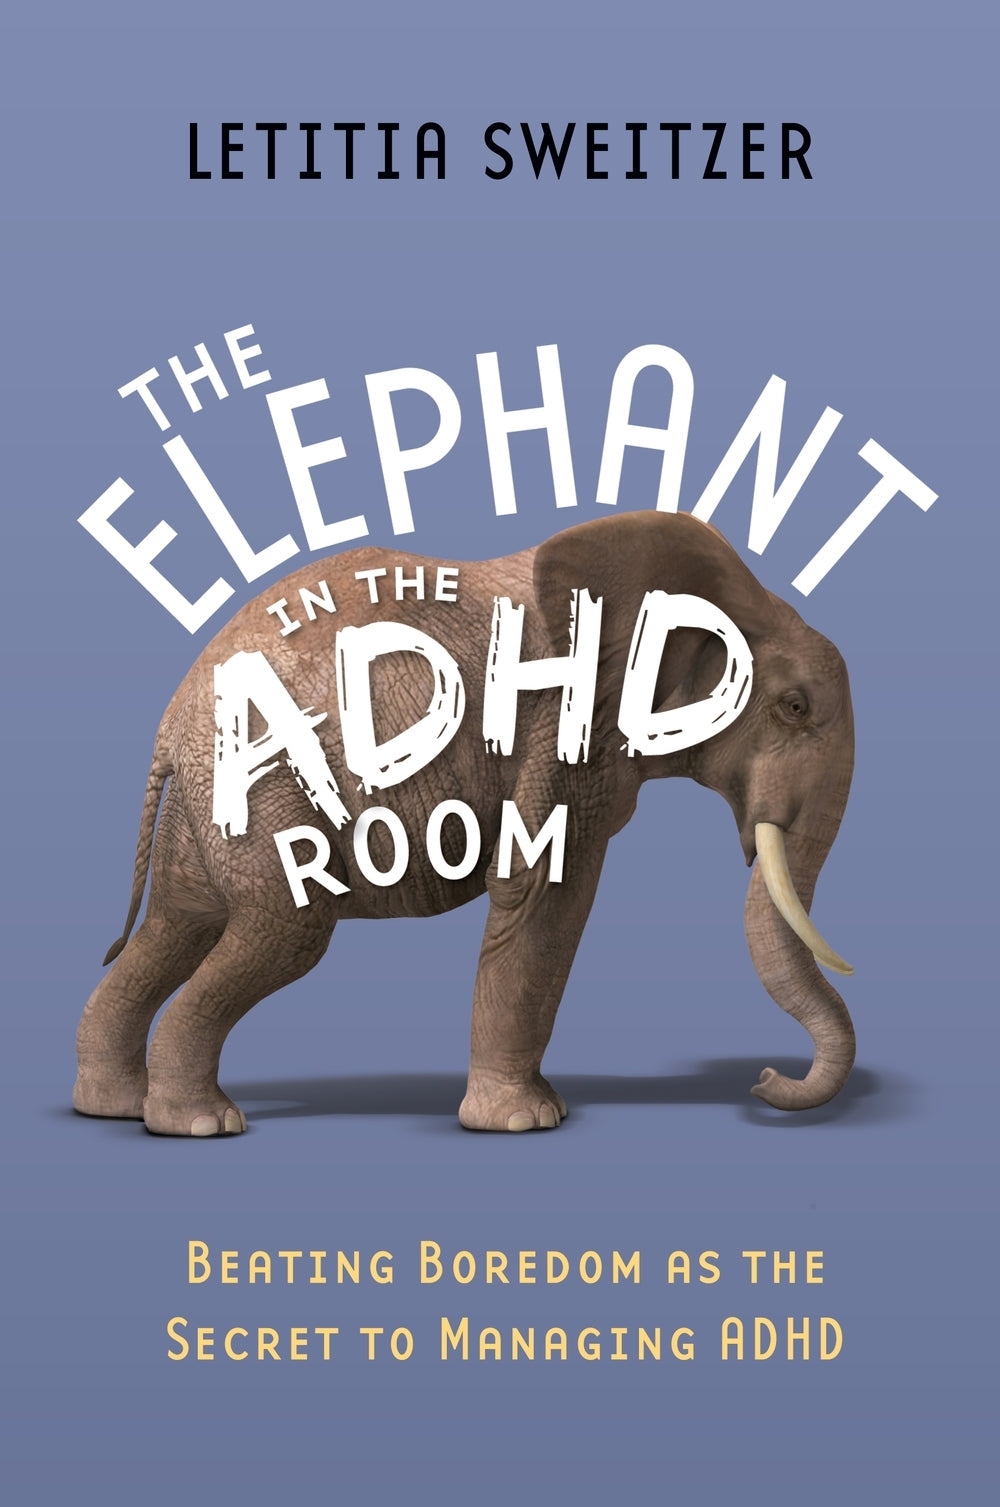 The Elephant in the ADHD Room by Letitia Sweitzer